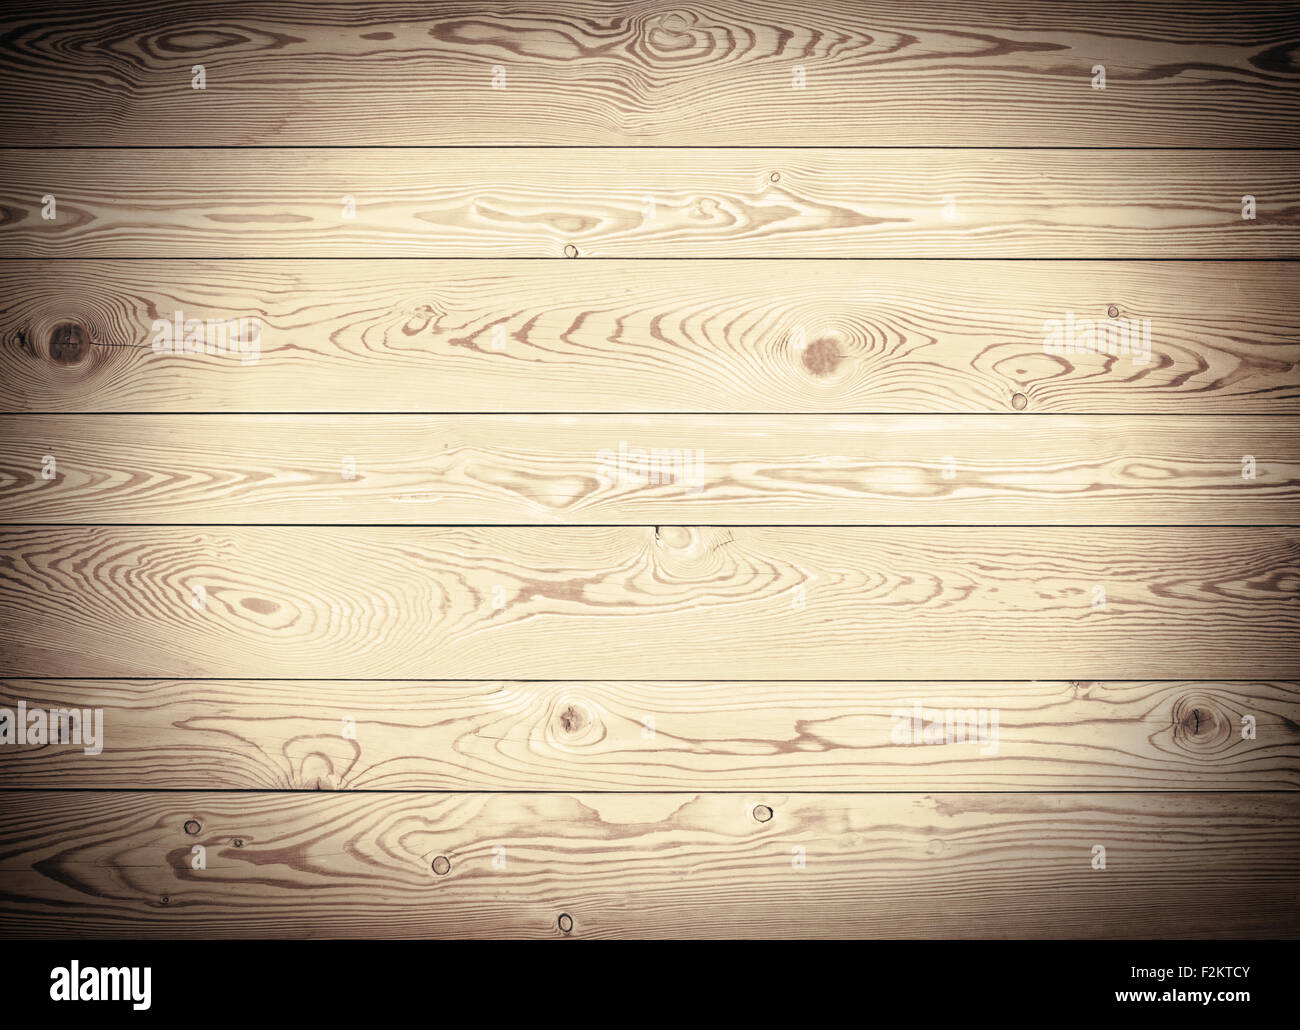 Light wooden texture with horizontal planks, table, desk or wall surface Stock Photo